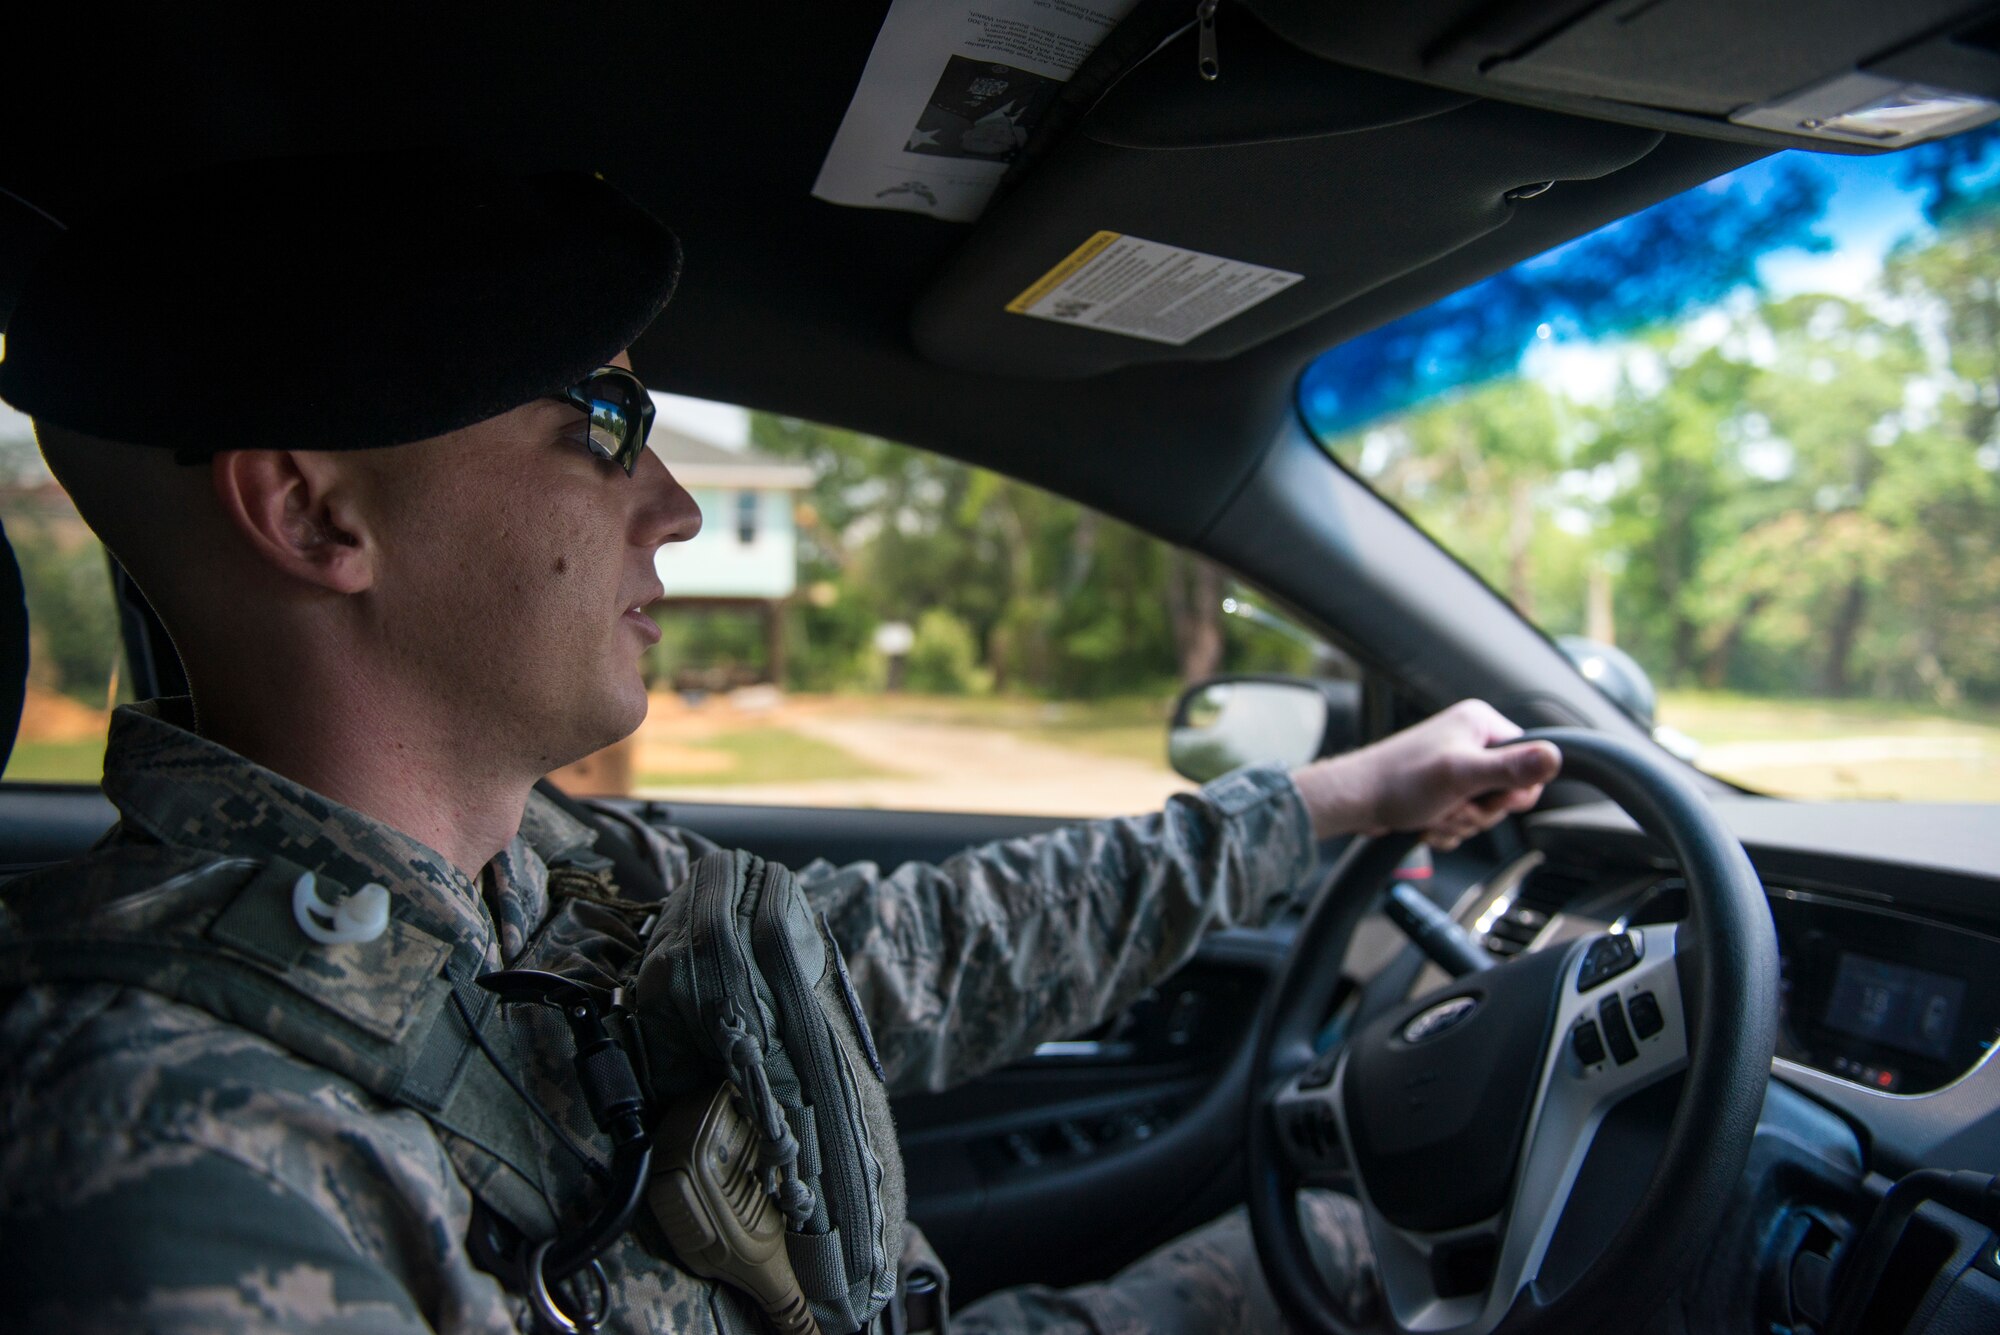 Tech. Sgt. Jarrod Kinard, 81st Security Forces Squadron flight chief, patrols the perimeter during a ride-along at Keesler Air Force Base, Miss., May 17, 2018. The ride-along program is part of the 81st SFS community involvement initiative where anyone, age 15 and up and with base access, can see what it's like to be a defender. If you are interested in the ride-along program, please contact Tech. Sgt. Matthew Oleson at 228-376-6601. (U.S. Air Force photo by Senior Airman Travis Beihl)